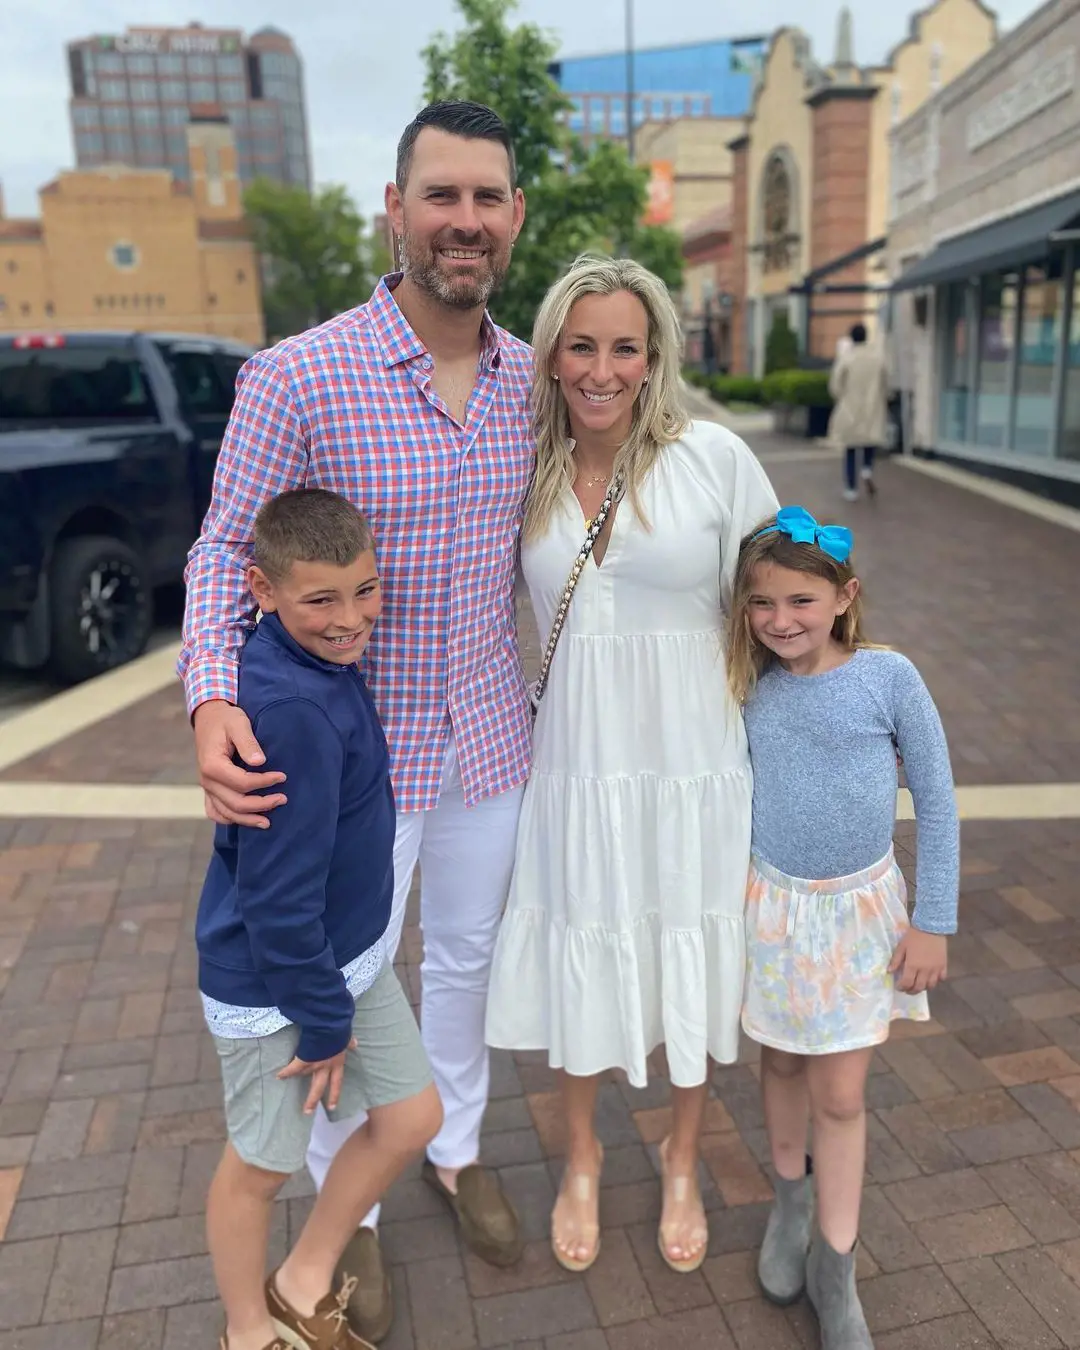 Chad pictured with his better half Brittany and their two kids as they celebrate Mother's Day